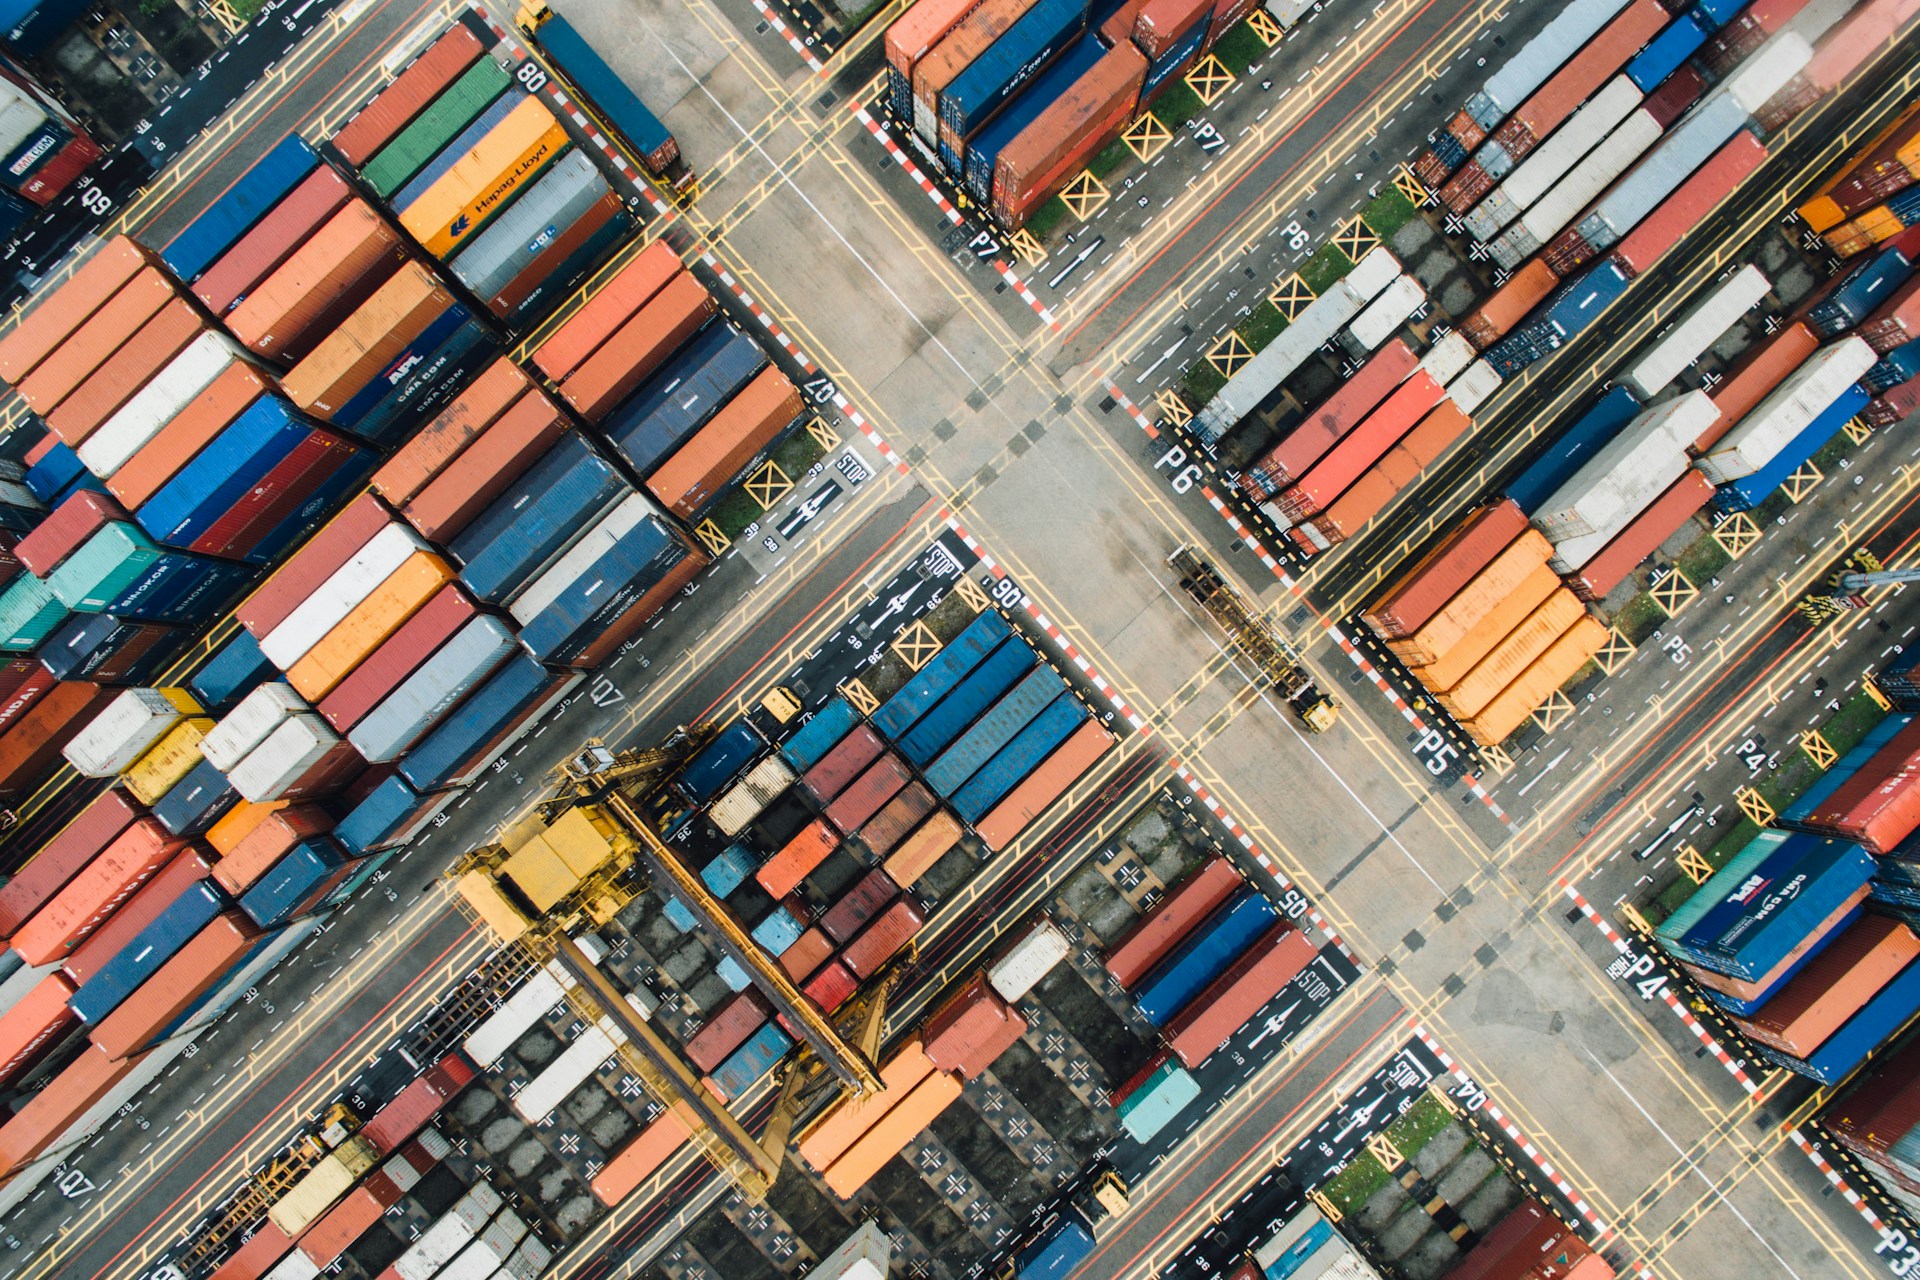 An aerial view of a container port